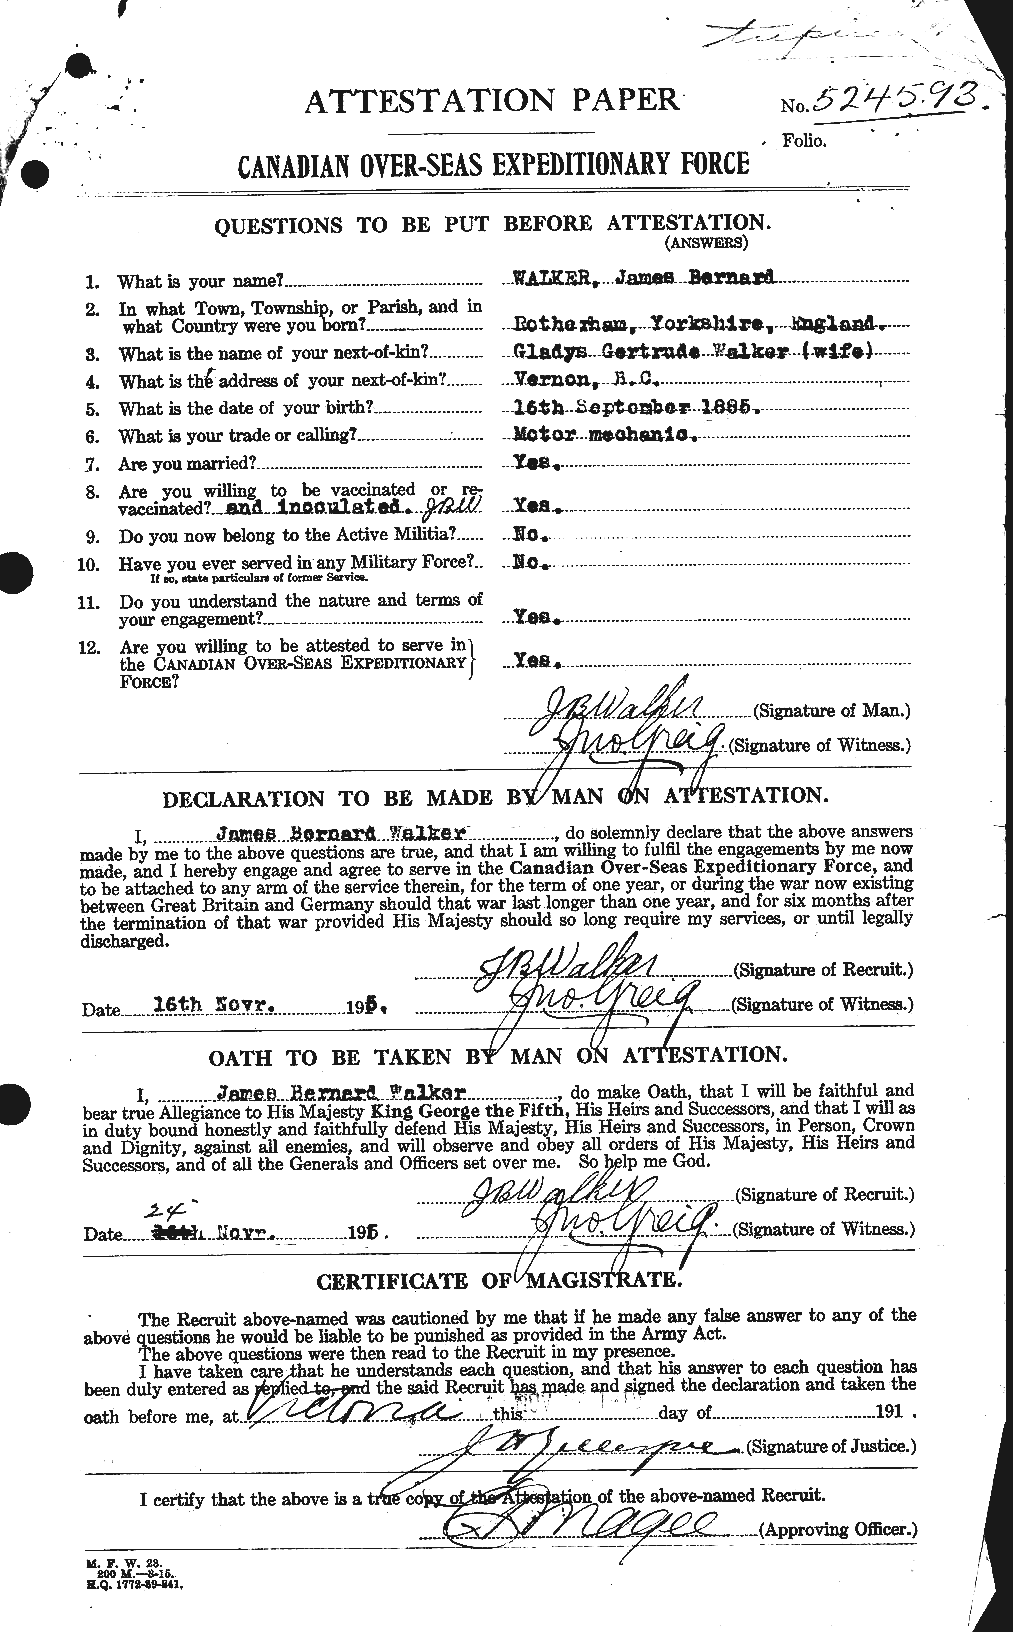 Personnel Records of the First World War - CEF 652984a